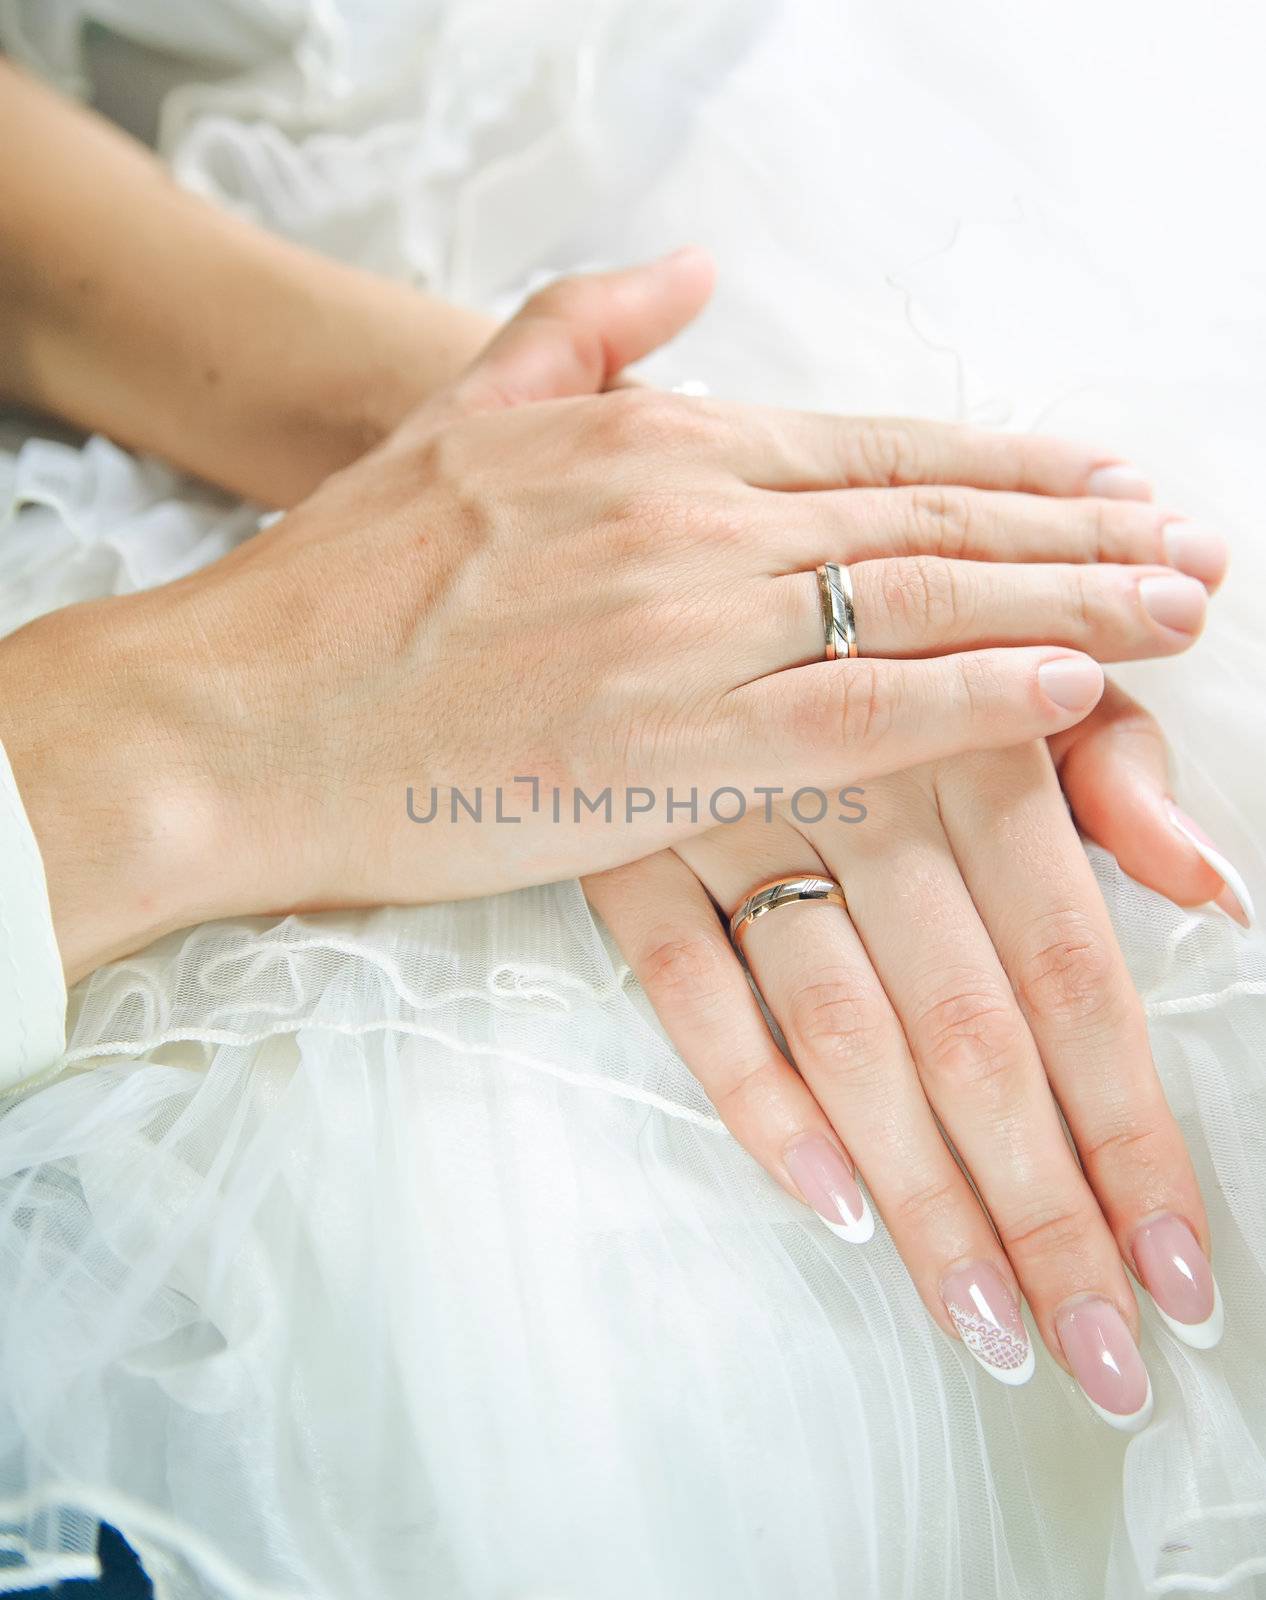 bridegroom hands on a bride hands. Love and care